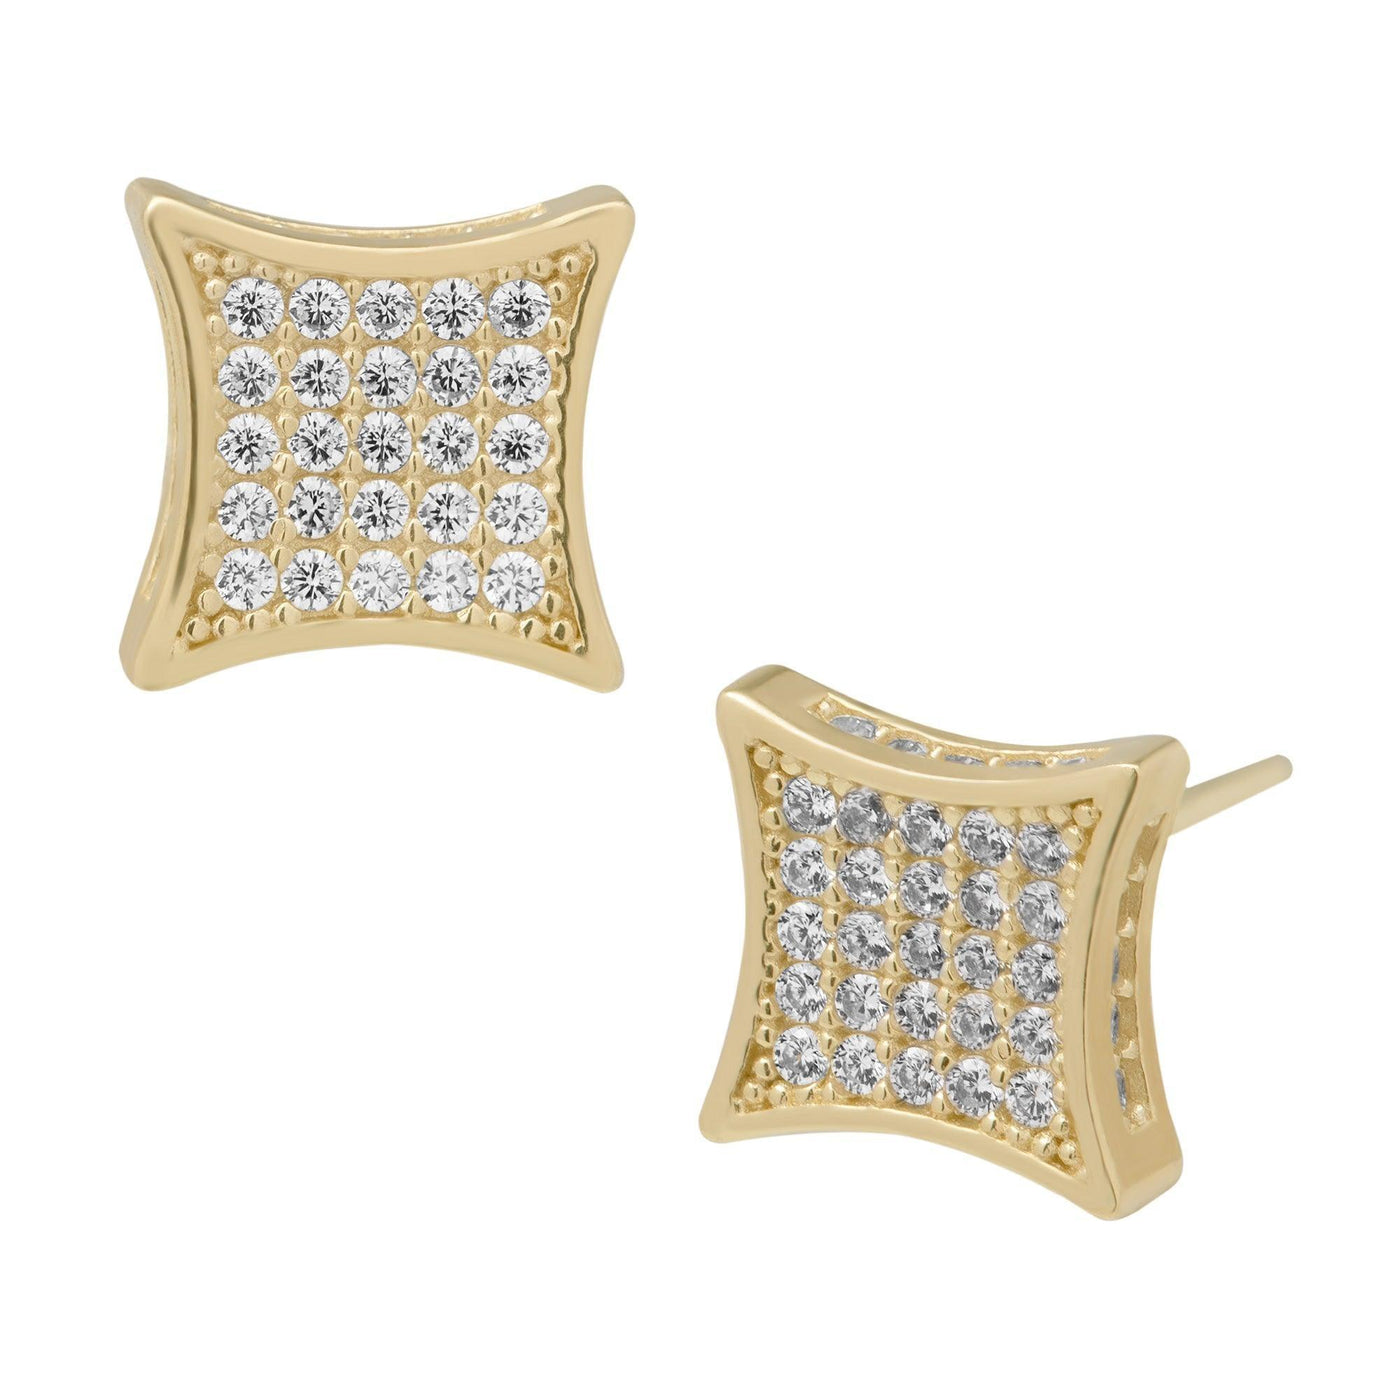 5/16" Small CZ Concave Square Stud Earrings Solid 10K Yellow Gold - bayamjewelry